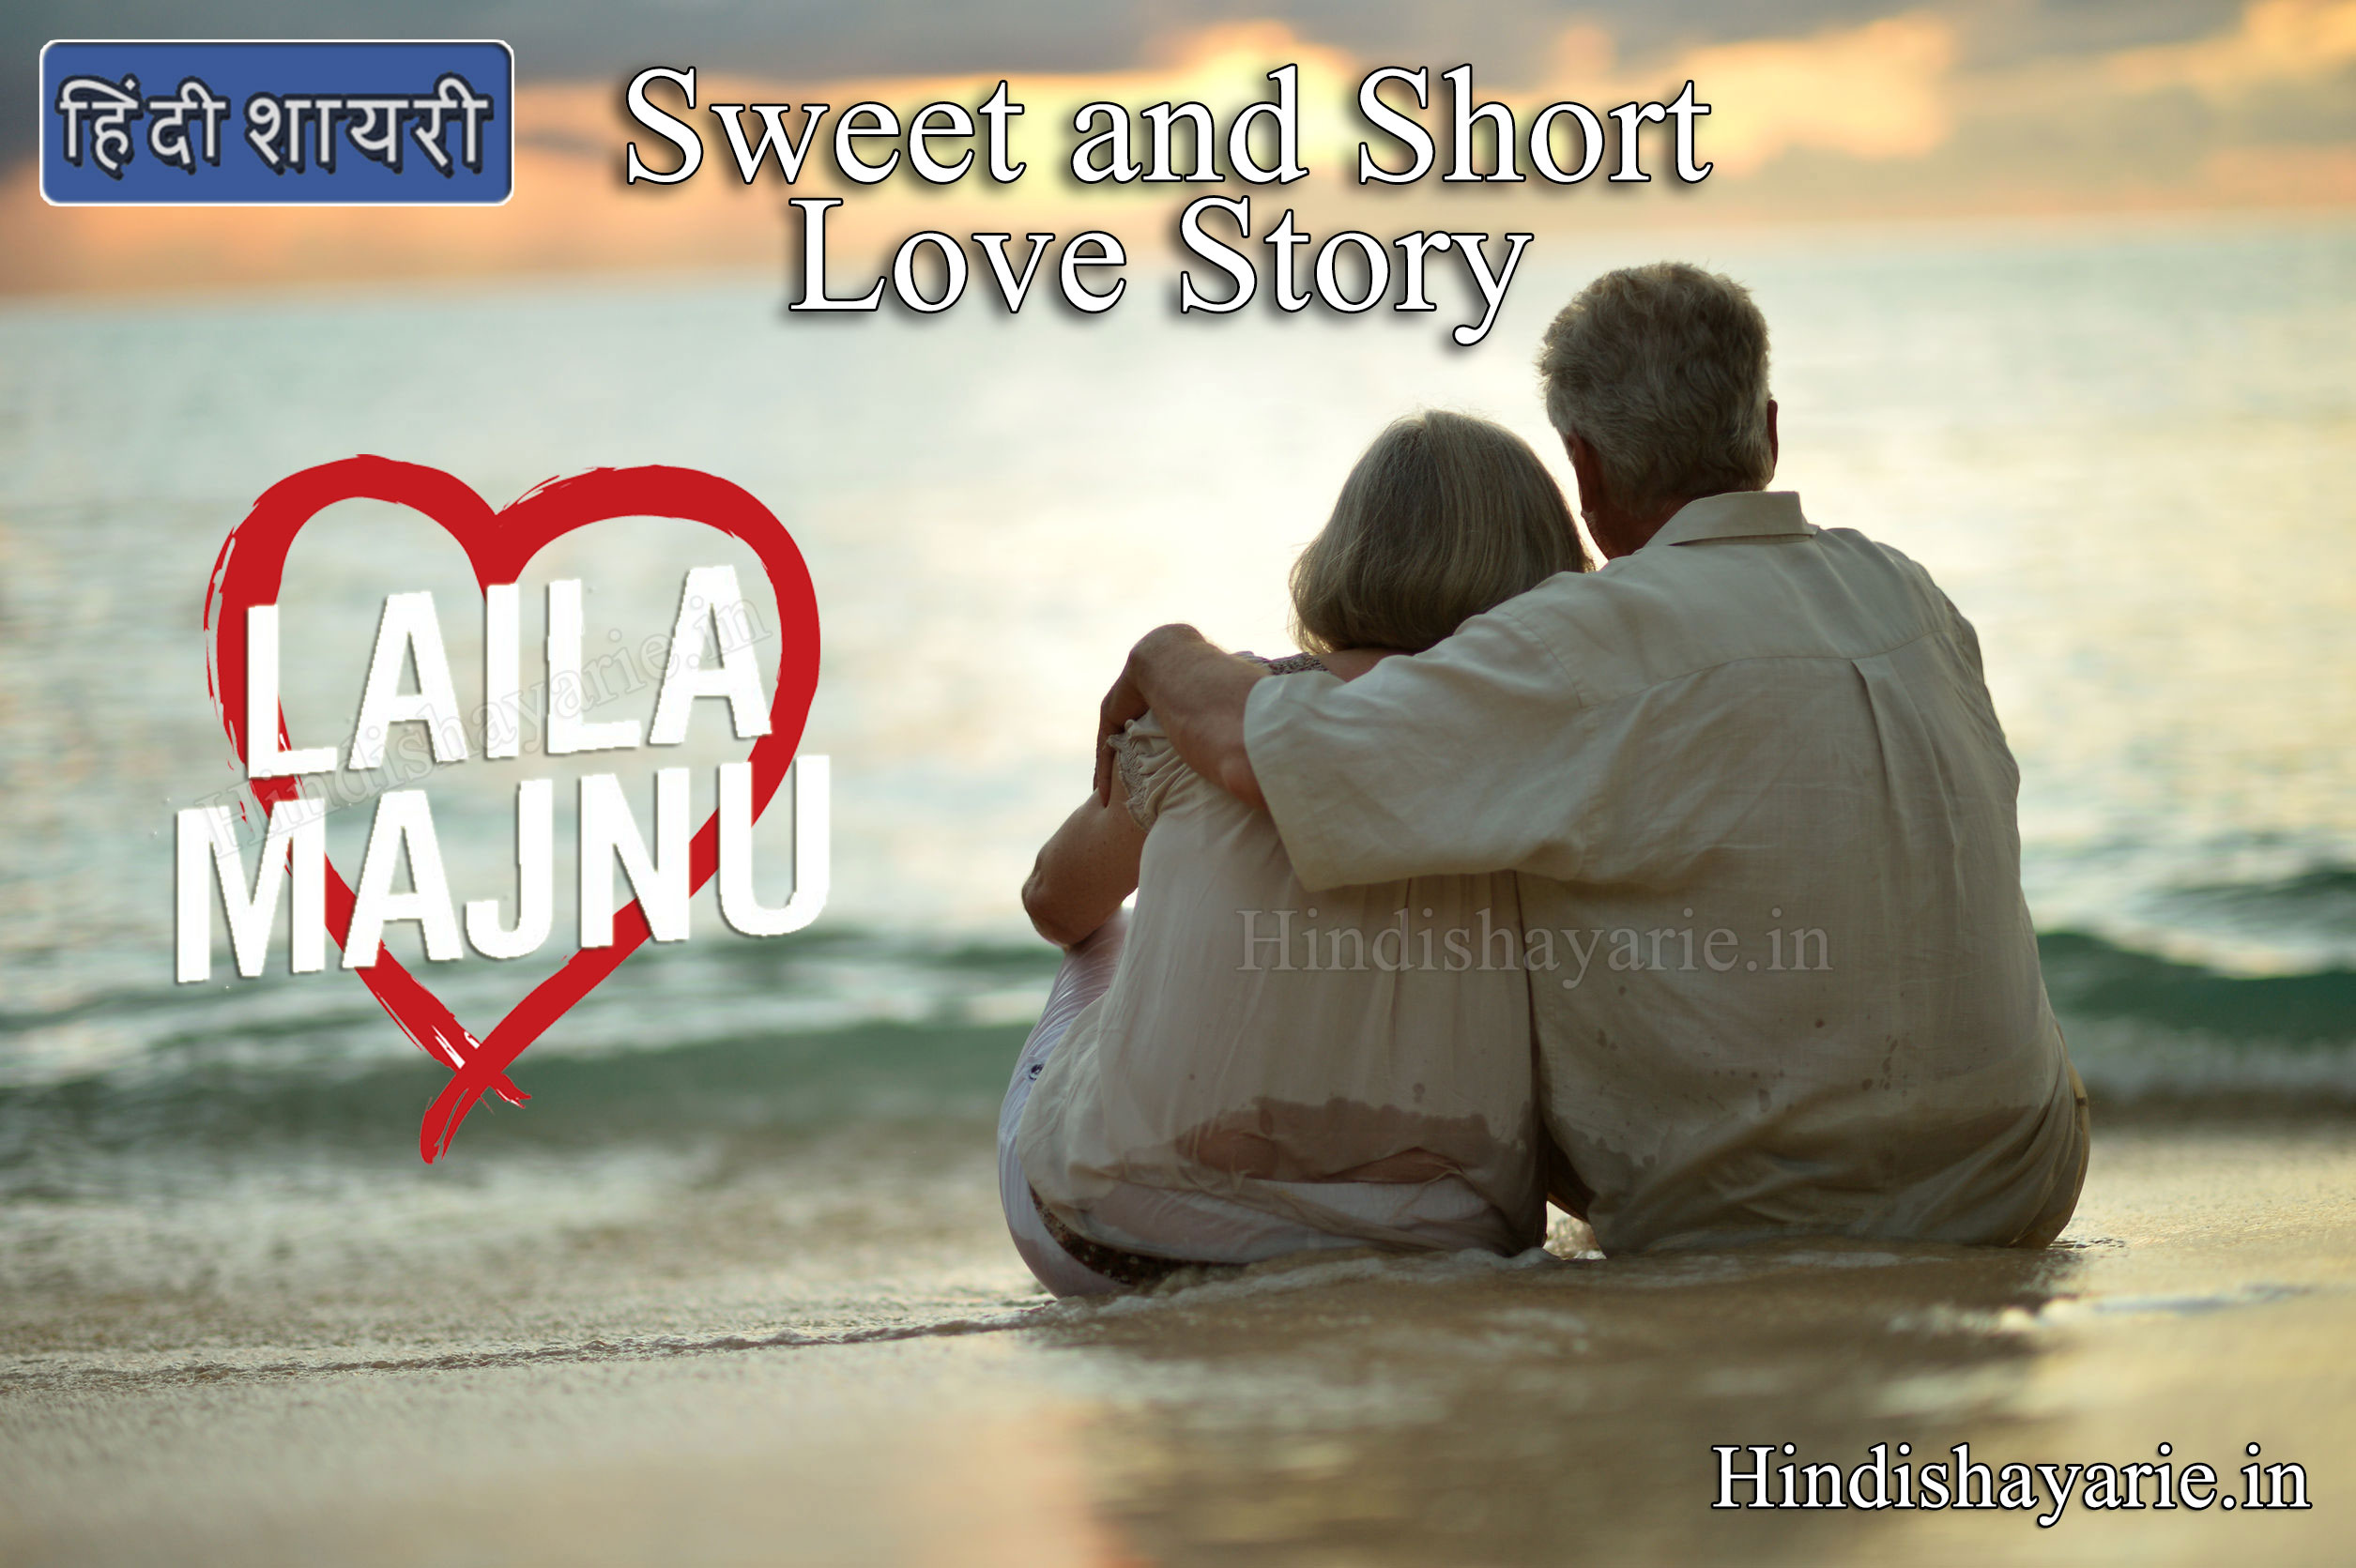 A Sweet and Short Funny Love Story in Hindi